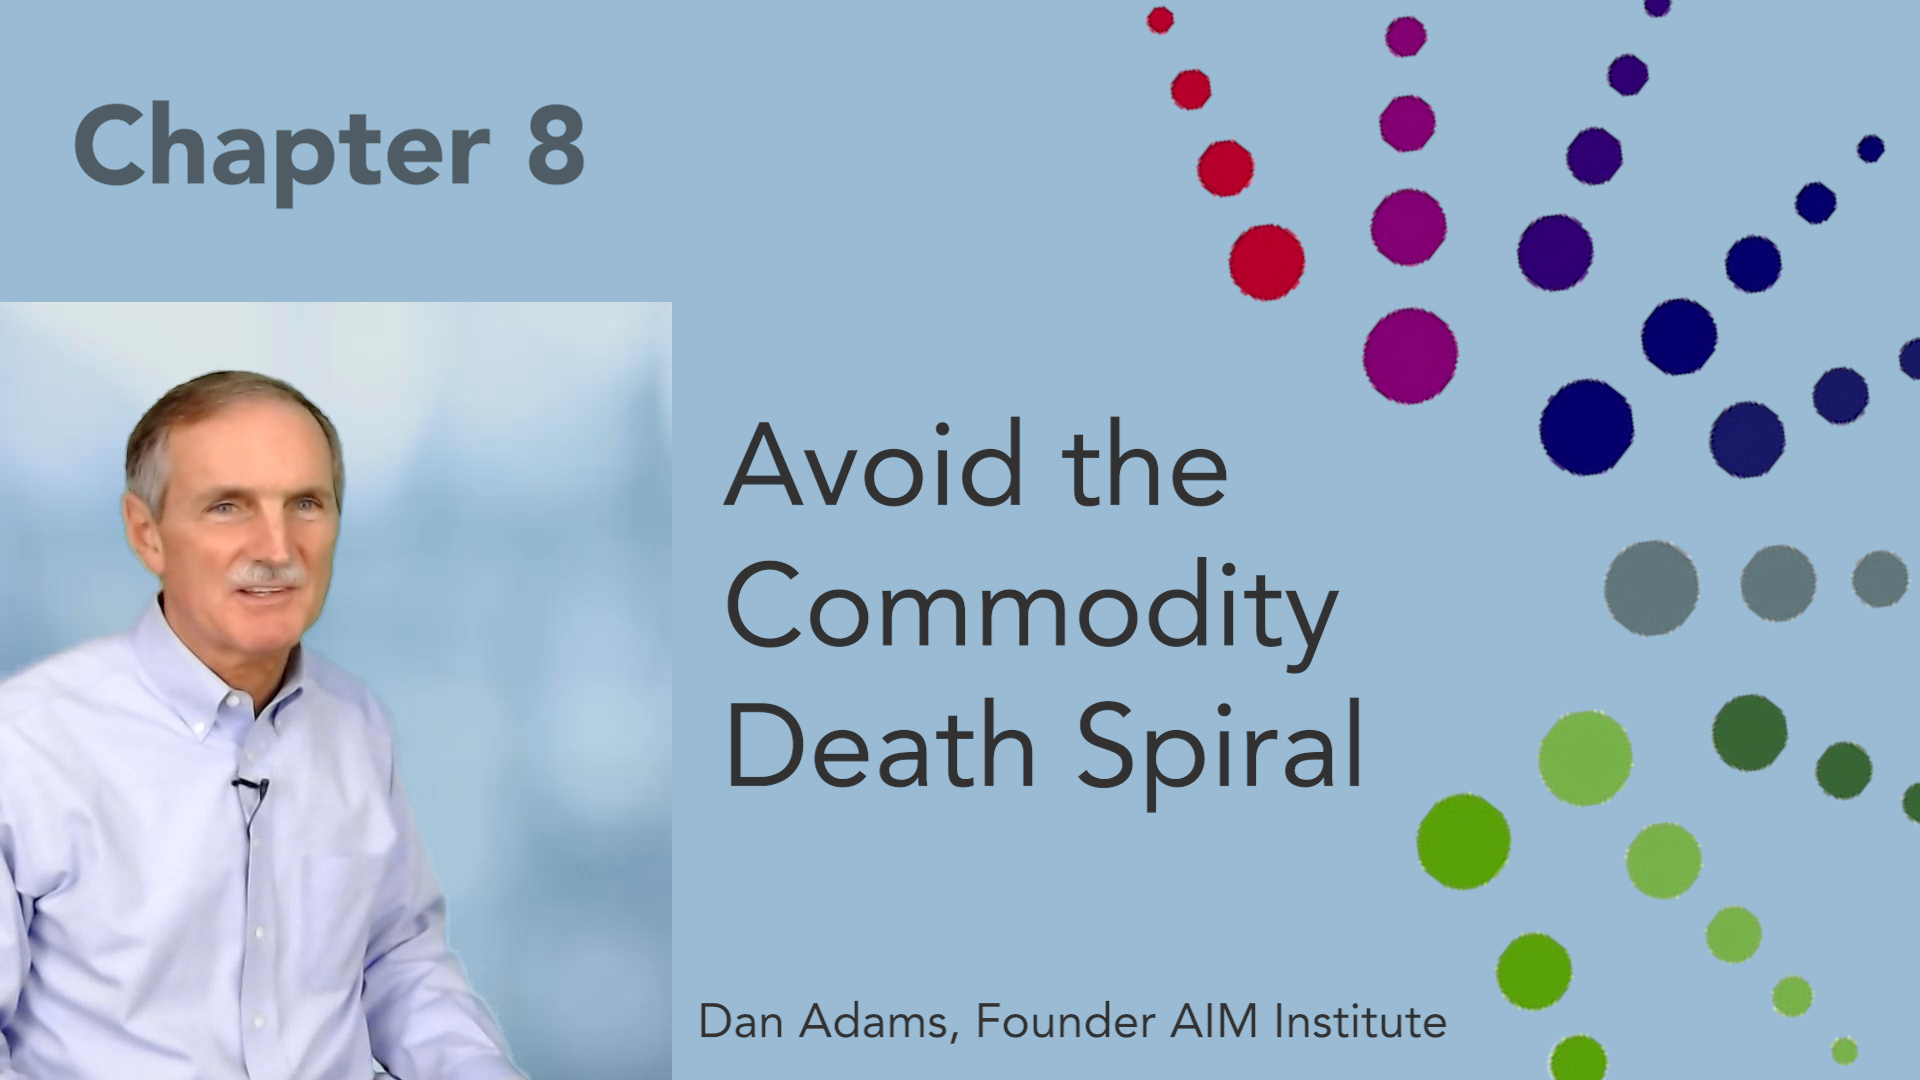 Avoiding the commodity death spiral